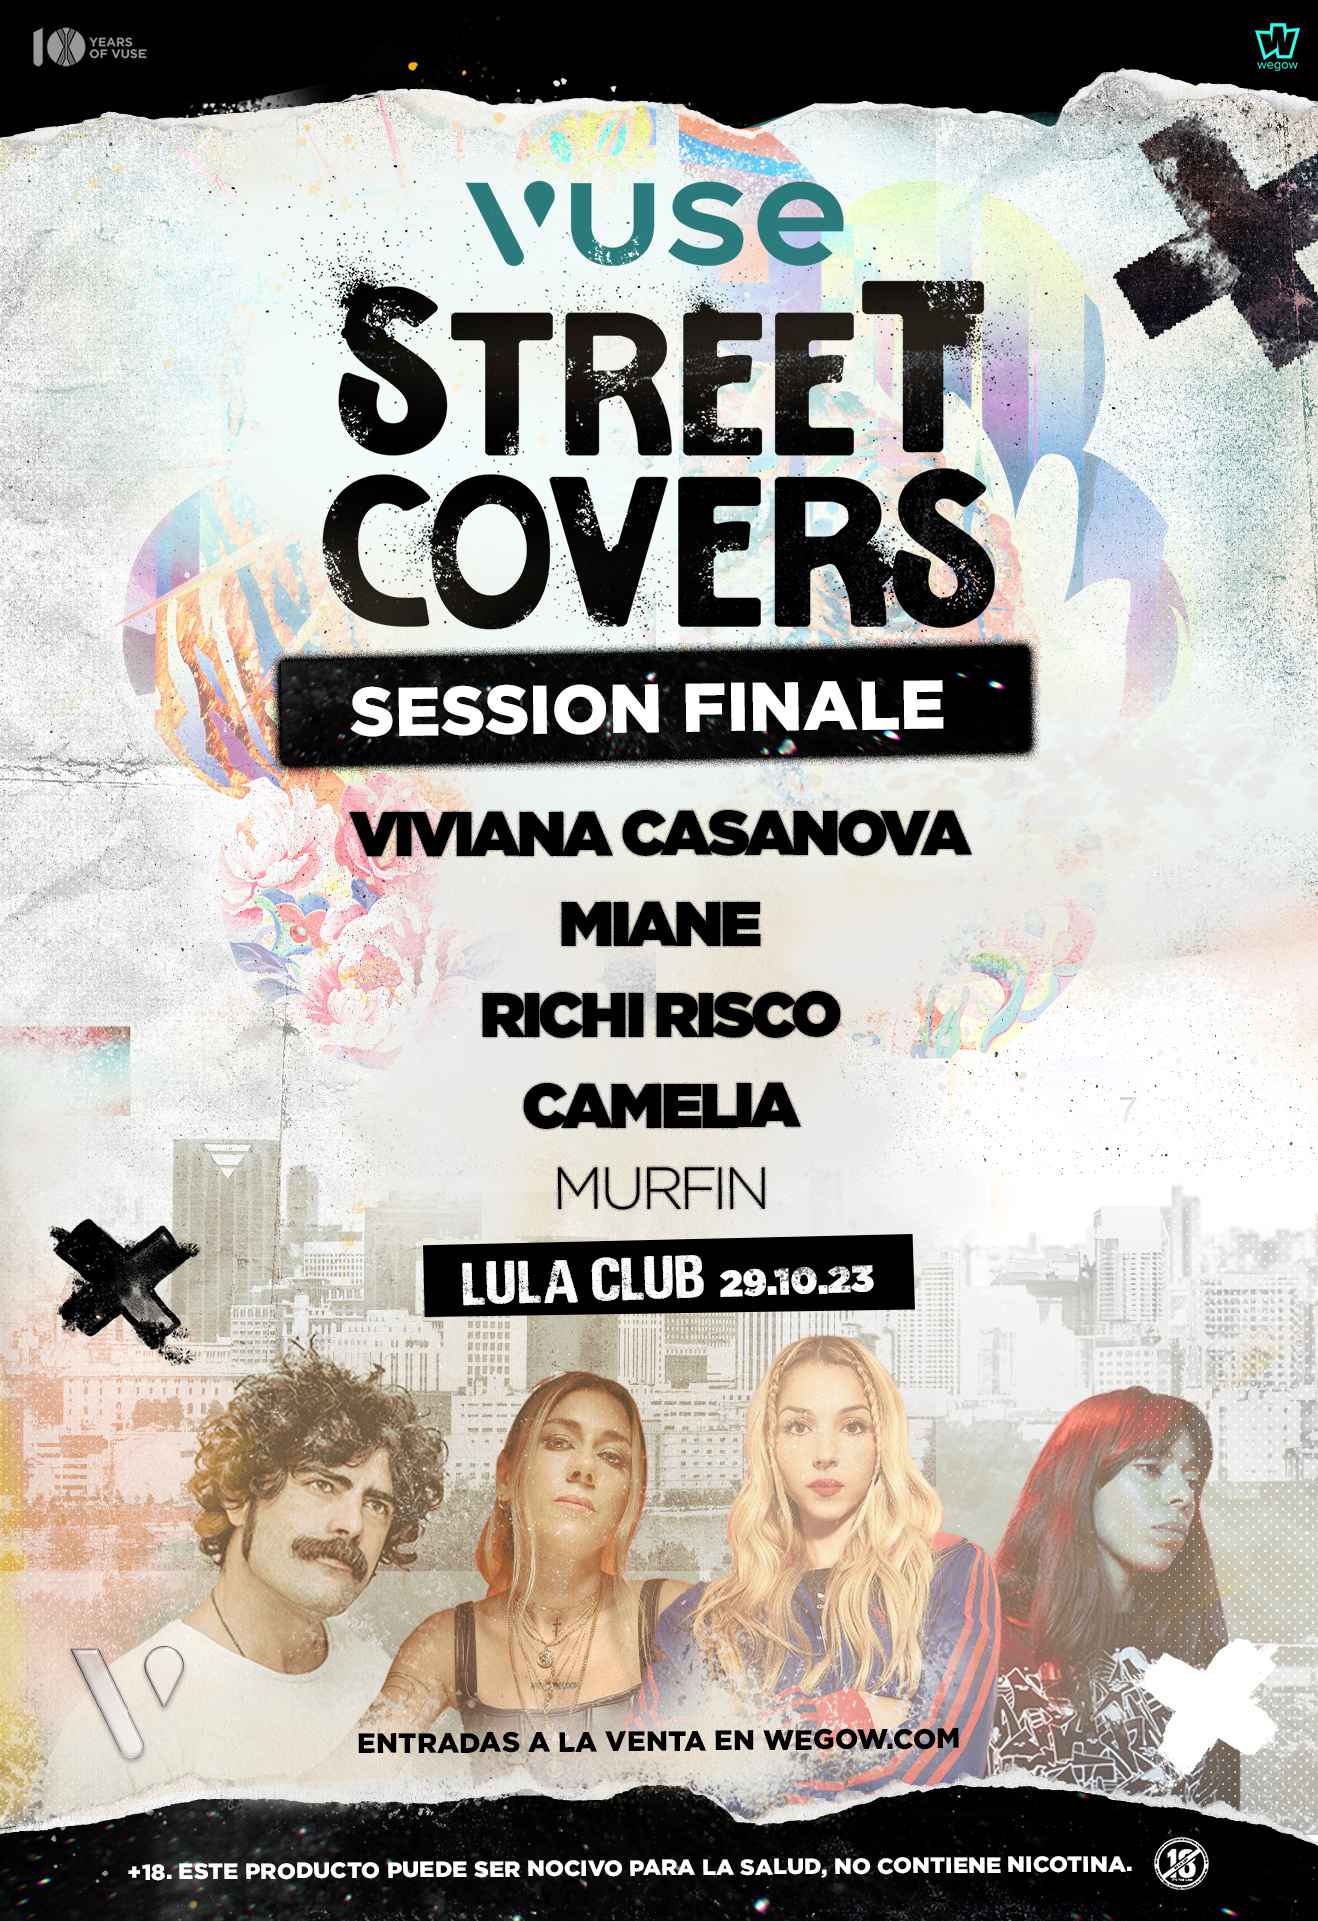 vuse street covers session finale